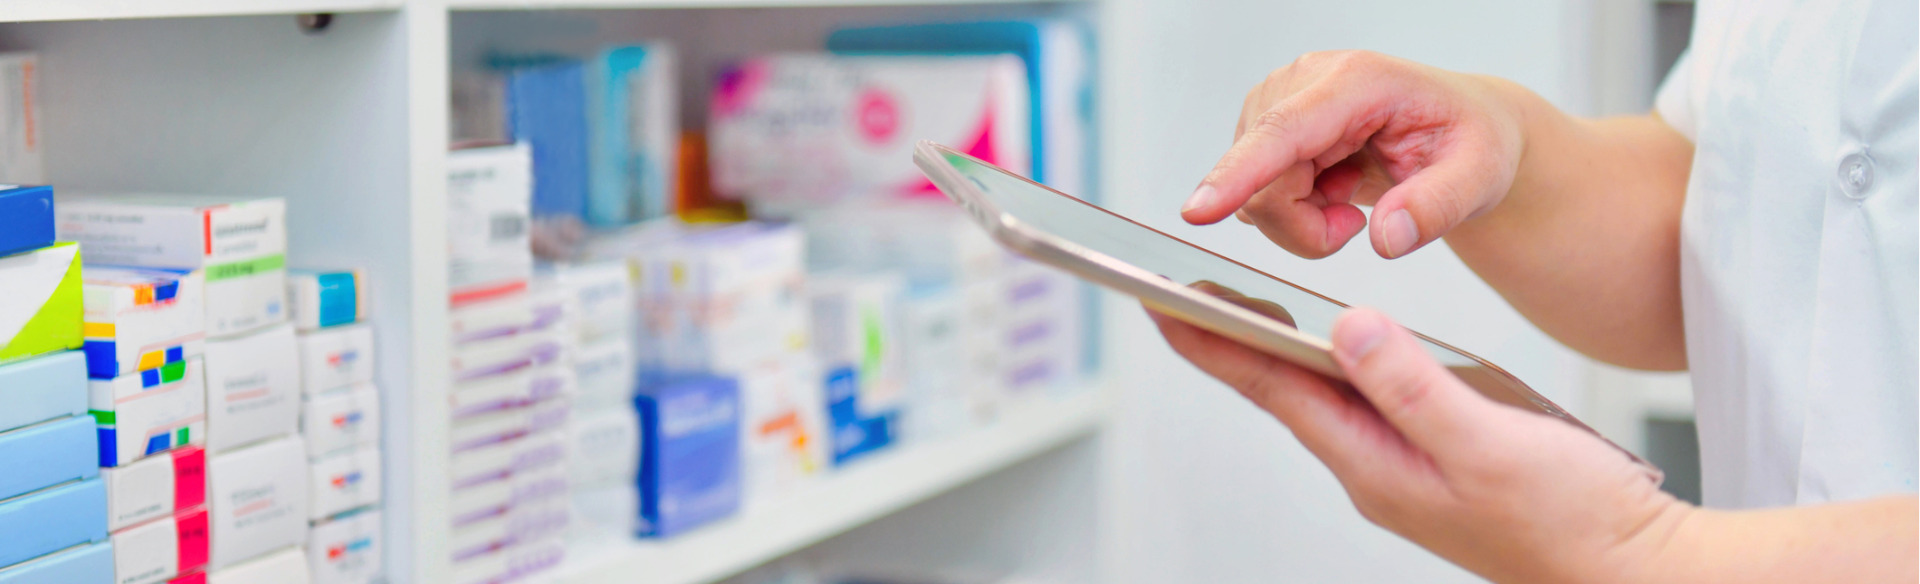 close up of a pharmacist holding a tablet device while checking medication stock